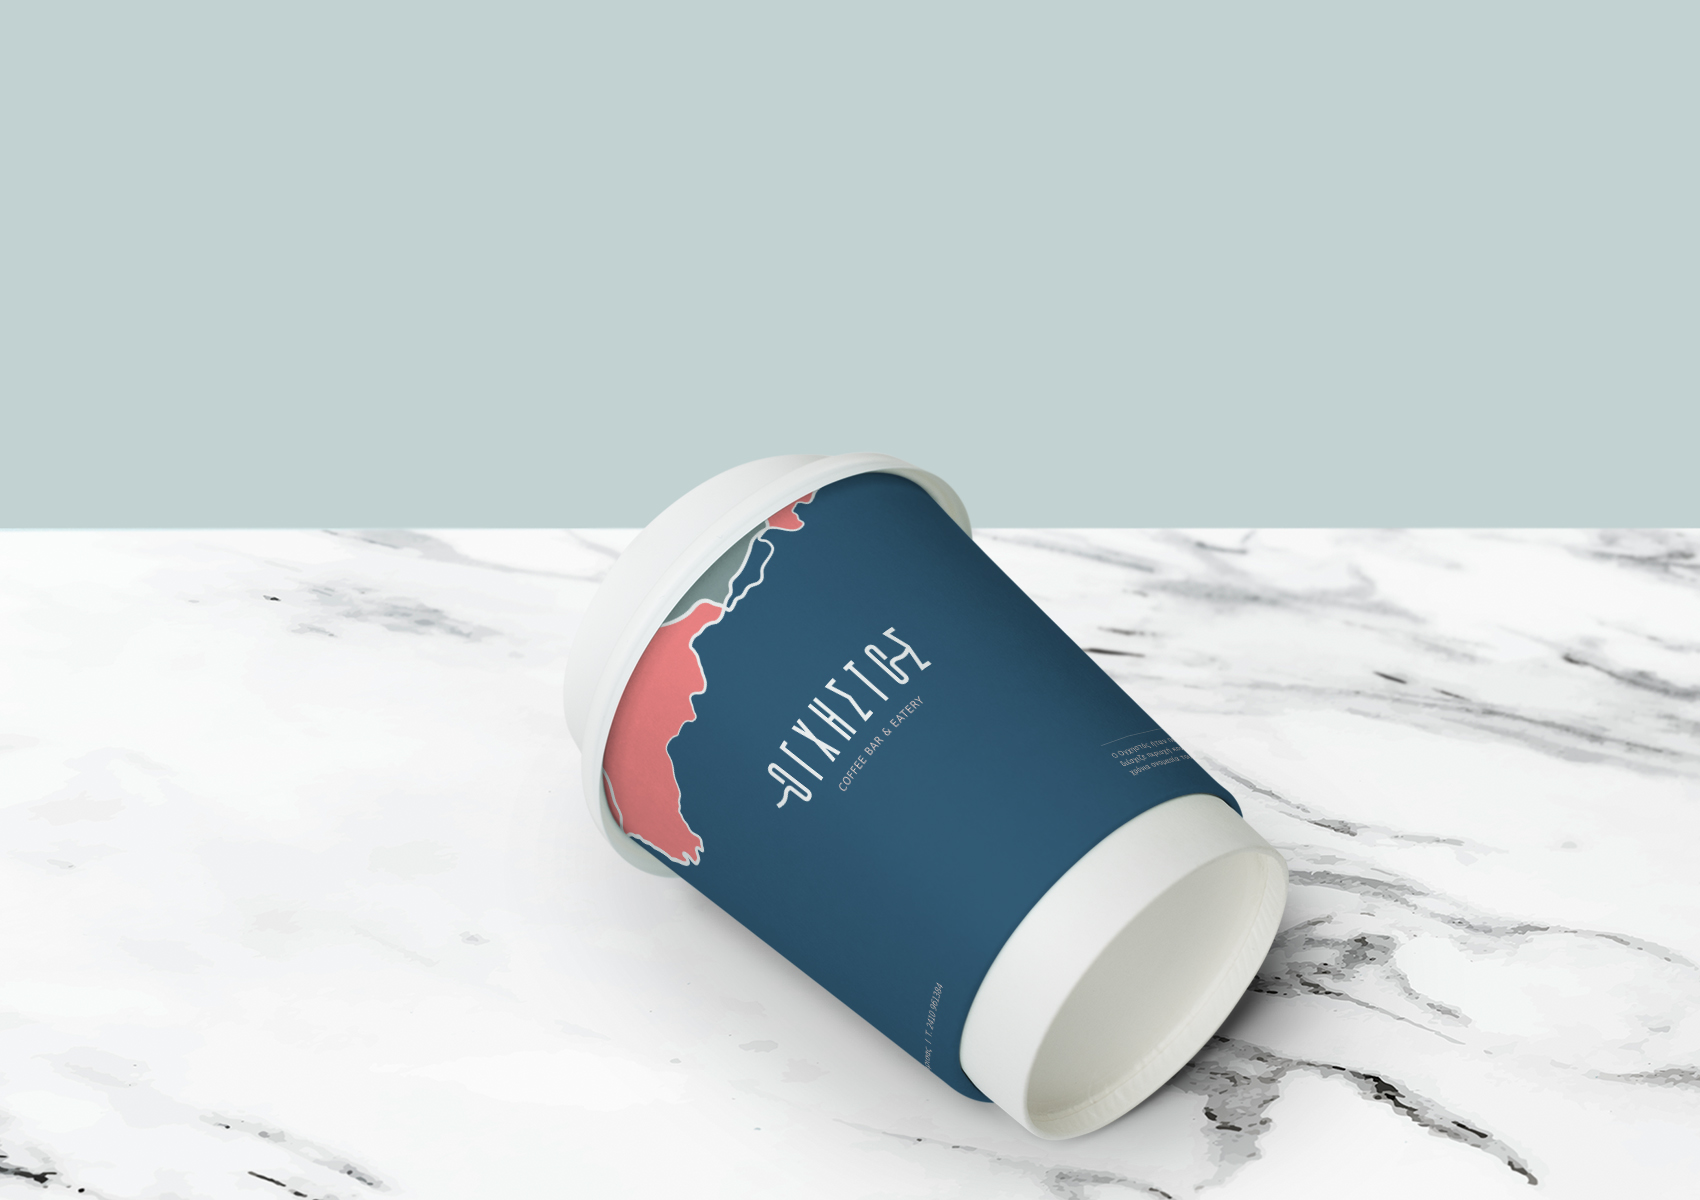 Oghistos coffee cup1700x1200 by xhristakis